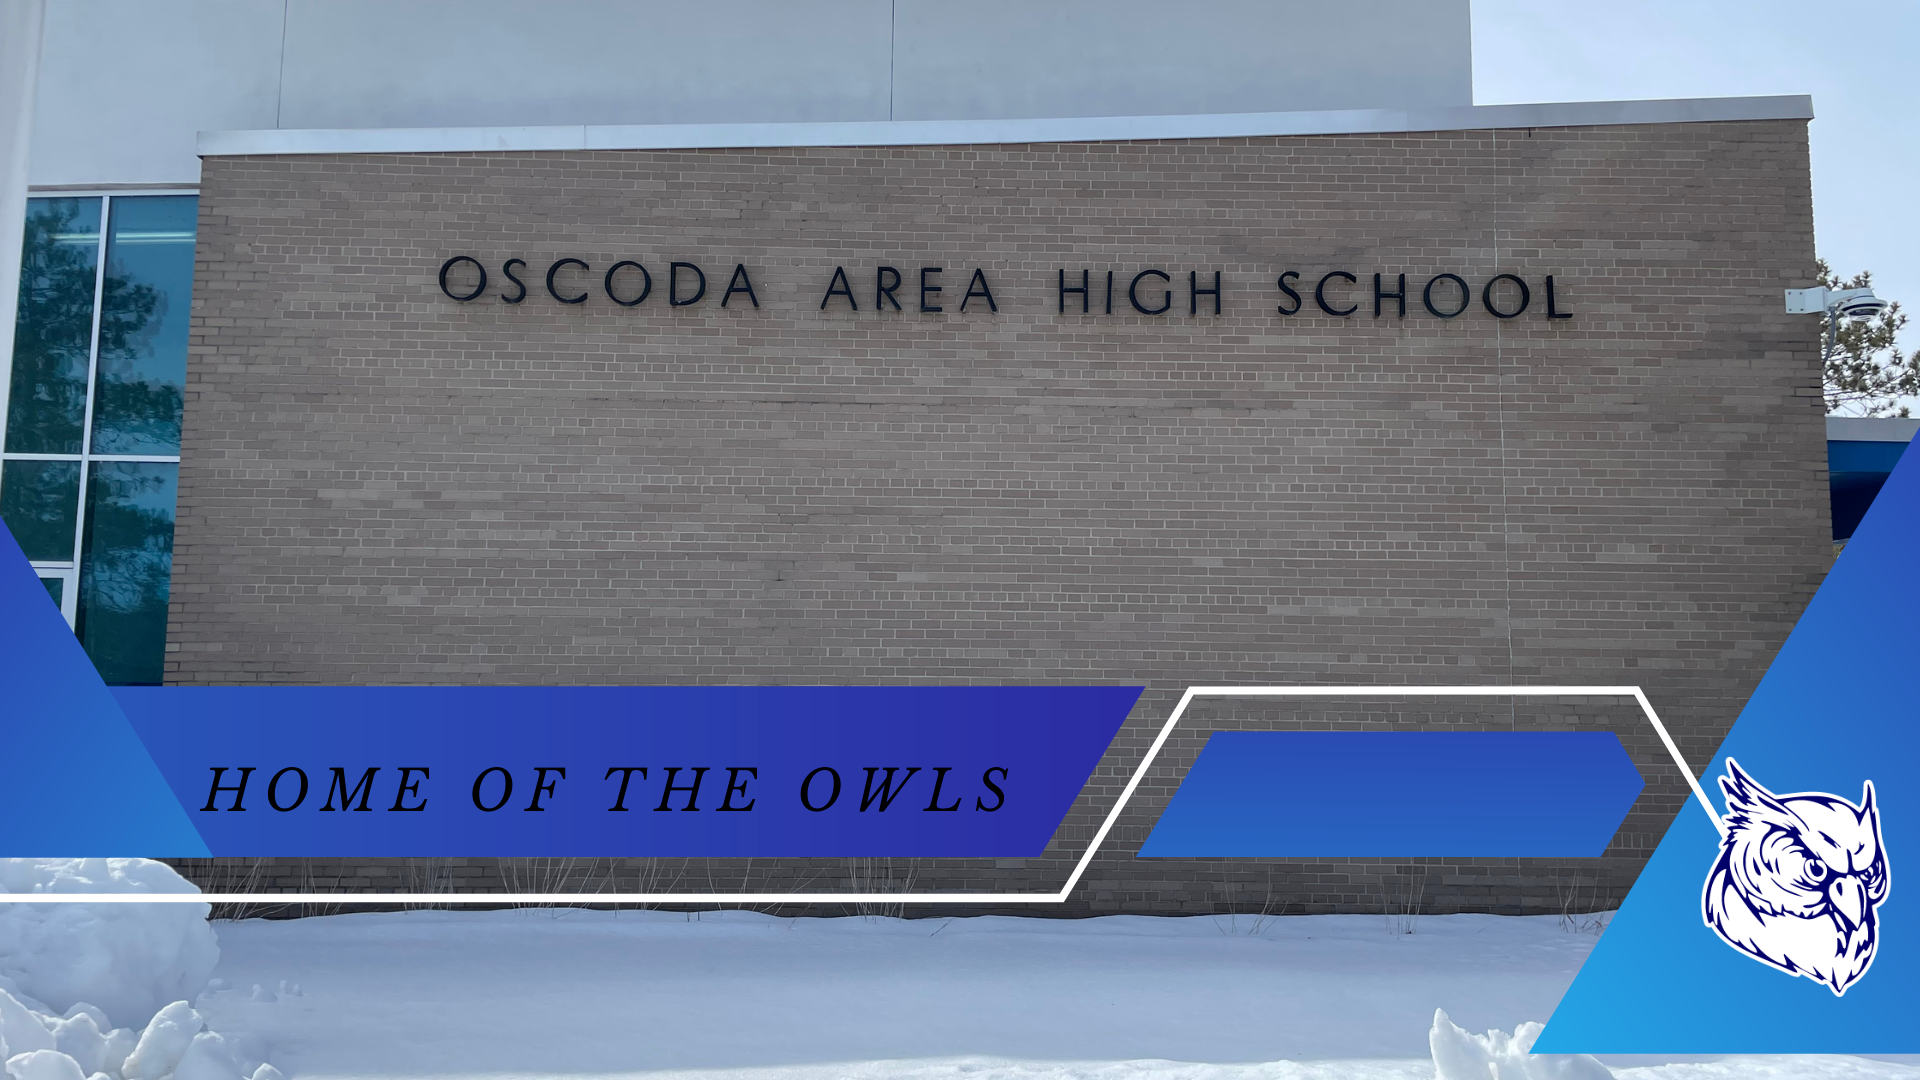 image of wall with text oscoda area high school home of the owls